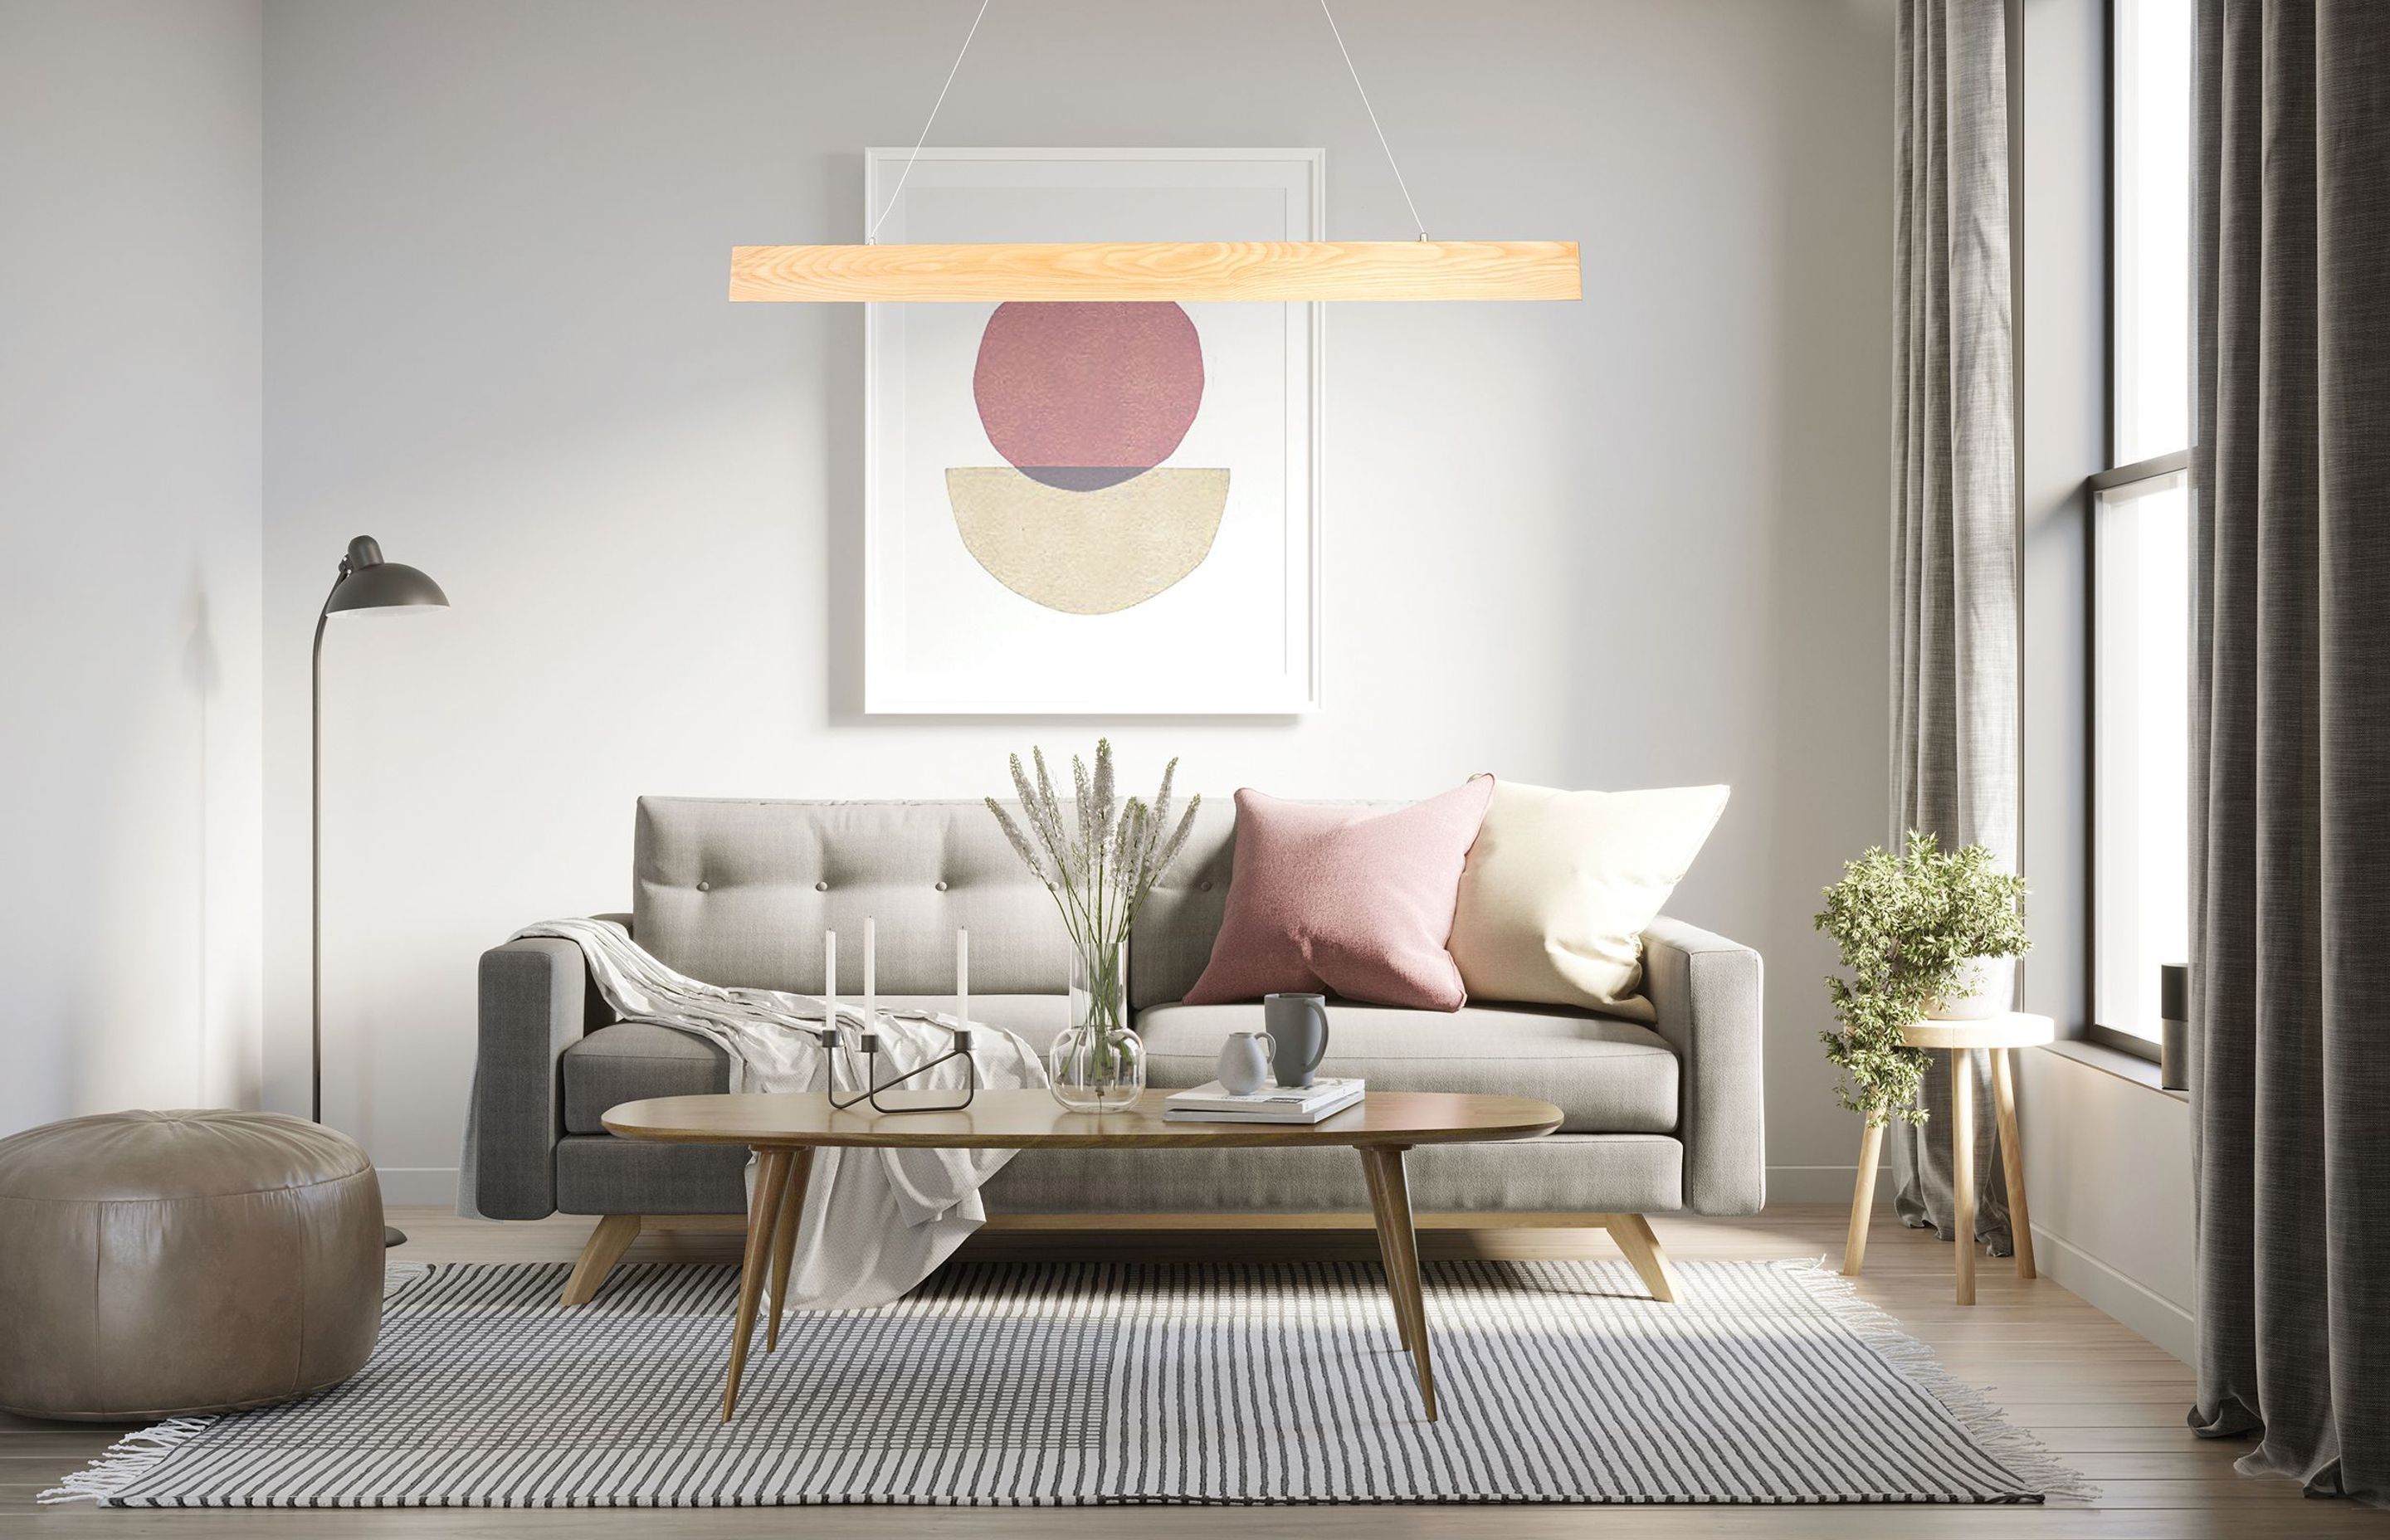 Updated for the 2021 Collection is Spend, the popular linear pendant now comes in a striking plywood timber finish.